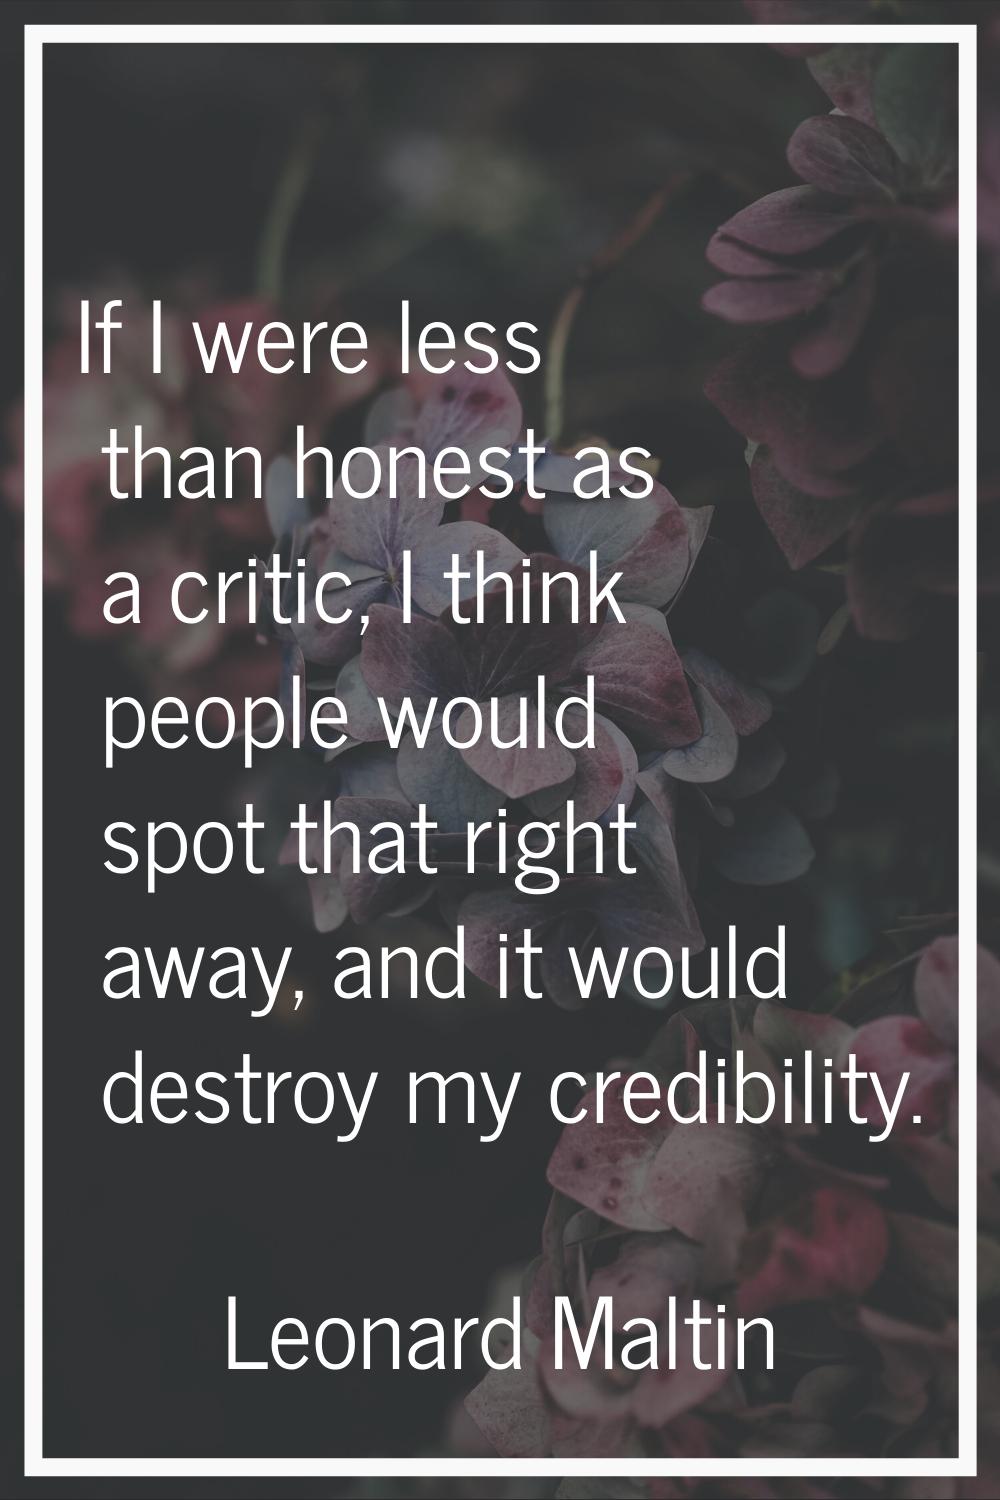 If I were less than honest as a critic, I think people would spot that right away, and it would des